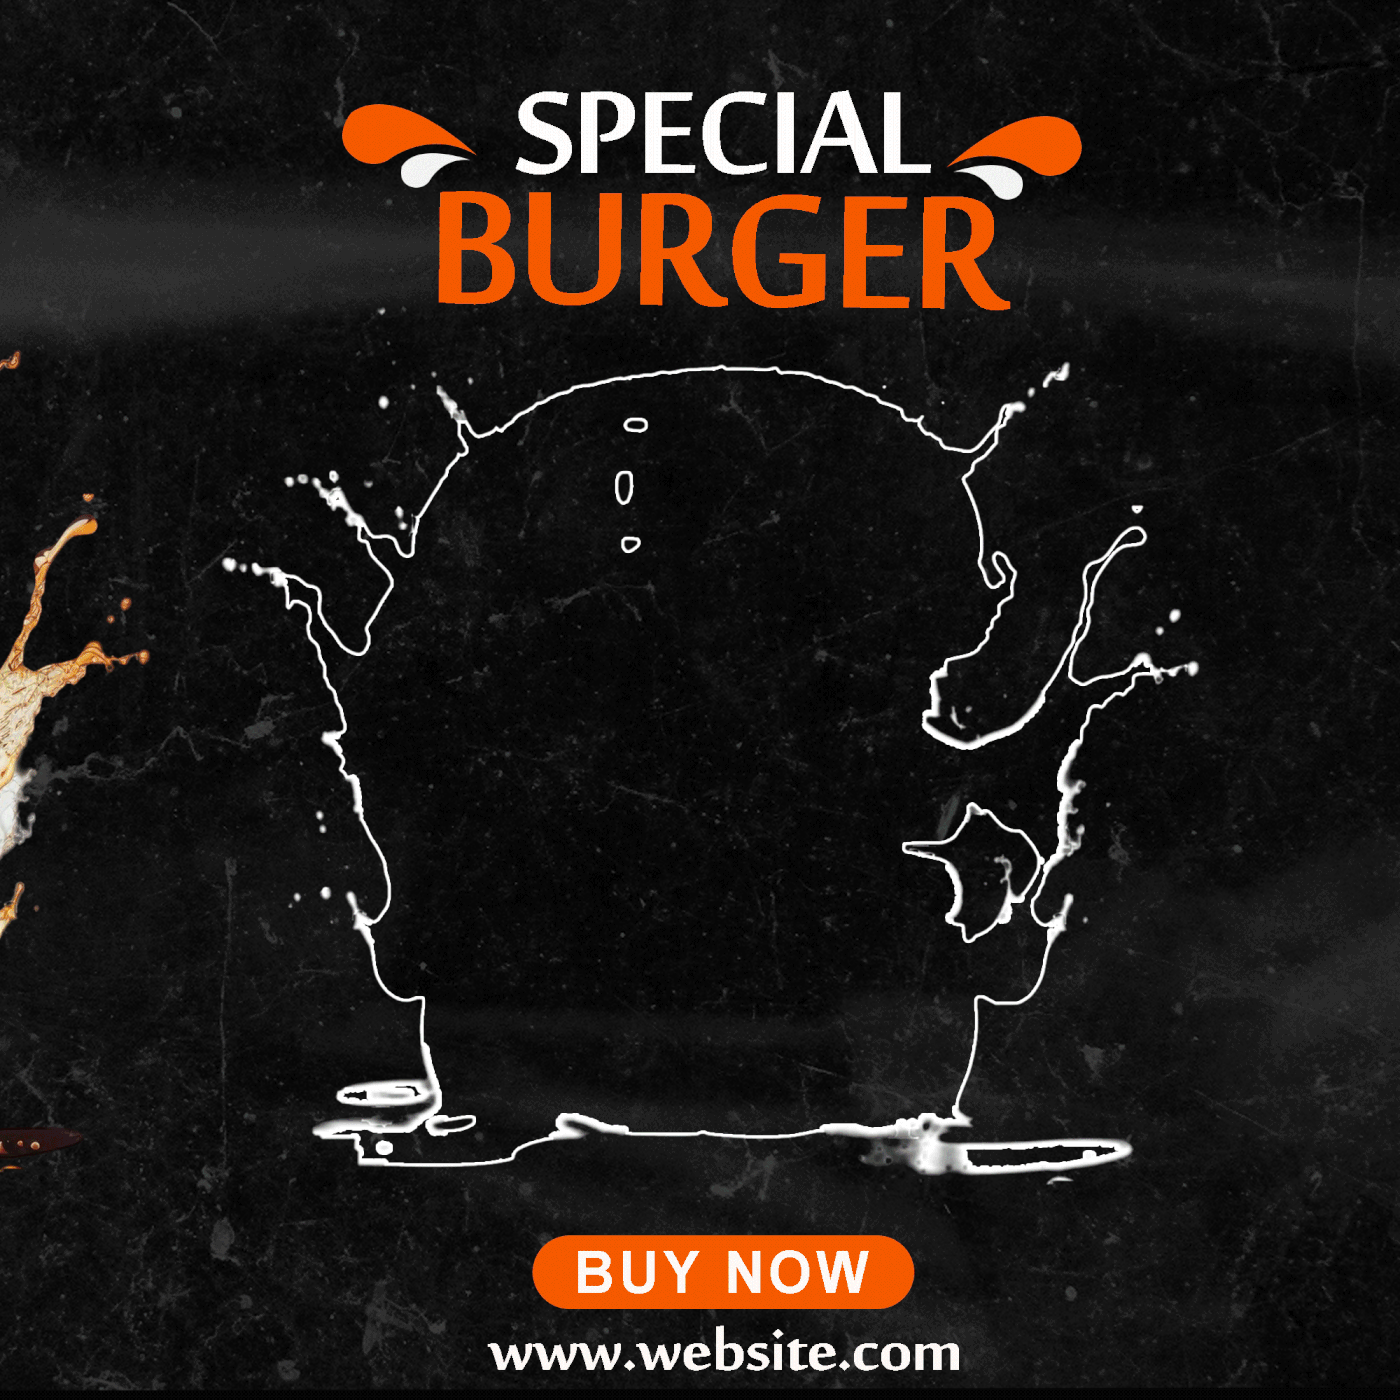 Animated GIF banner ad showing special burgers for purchase.